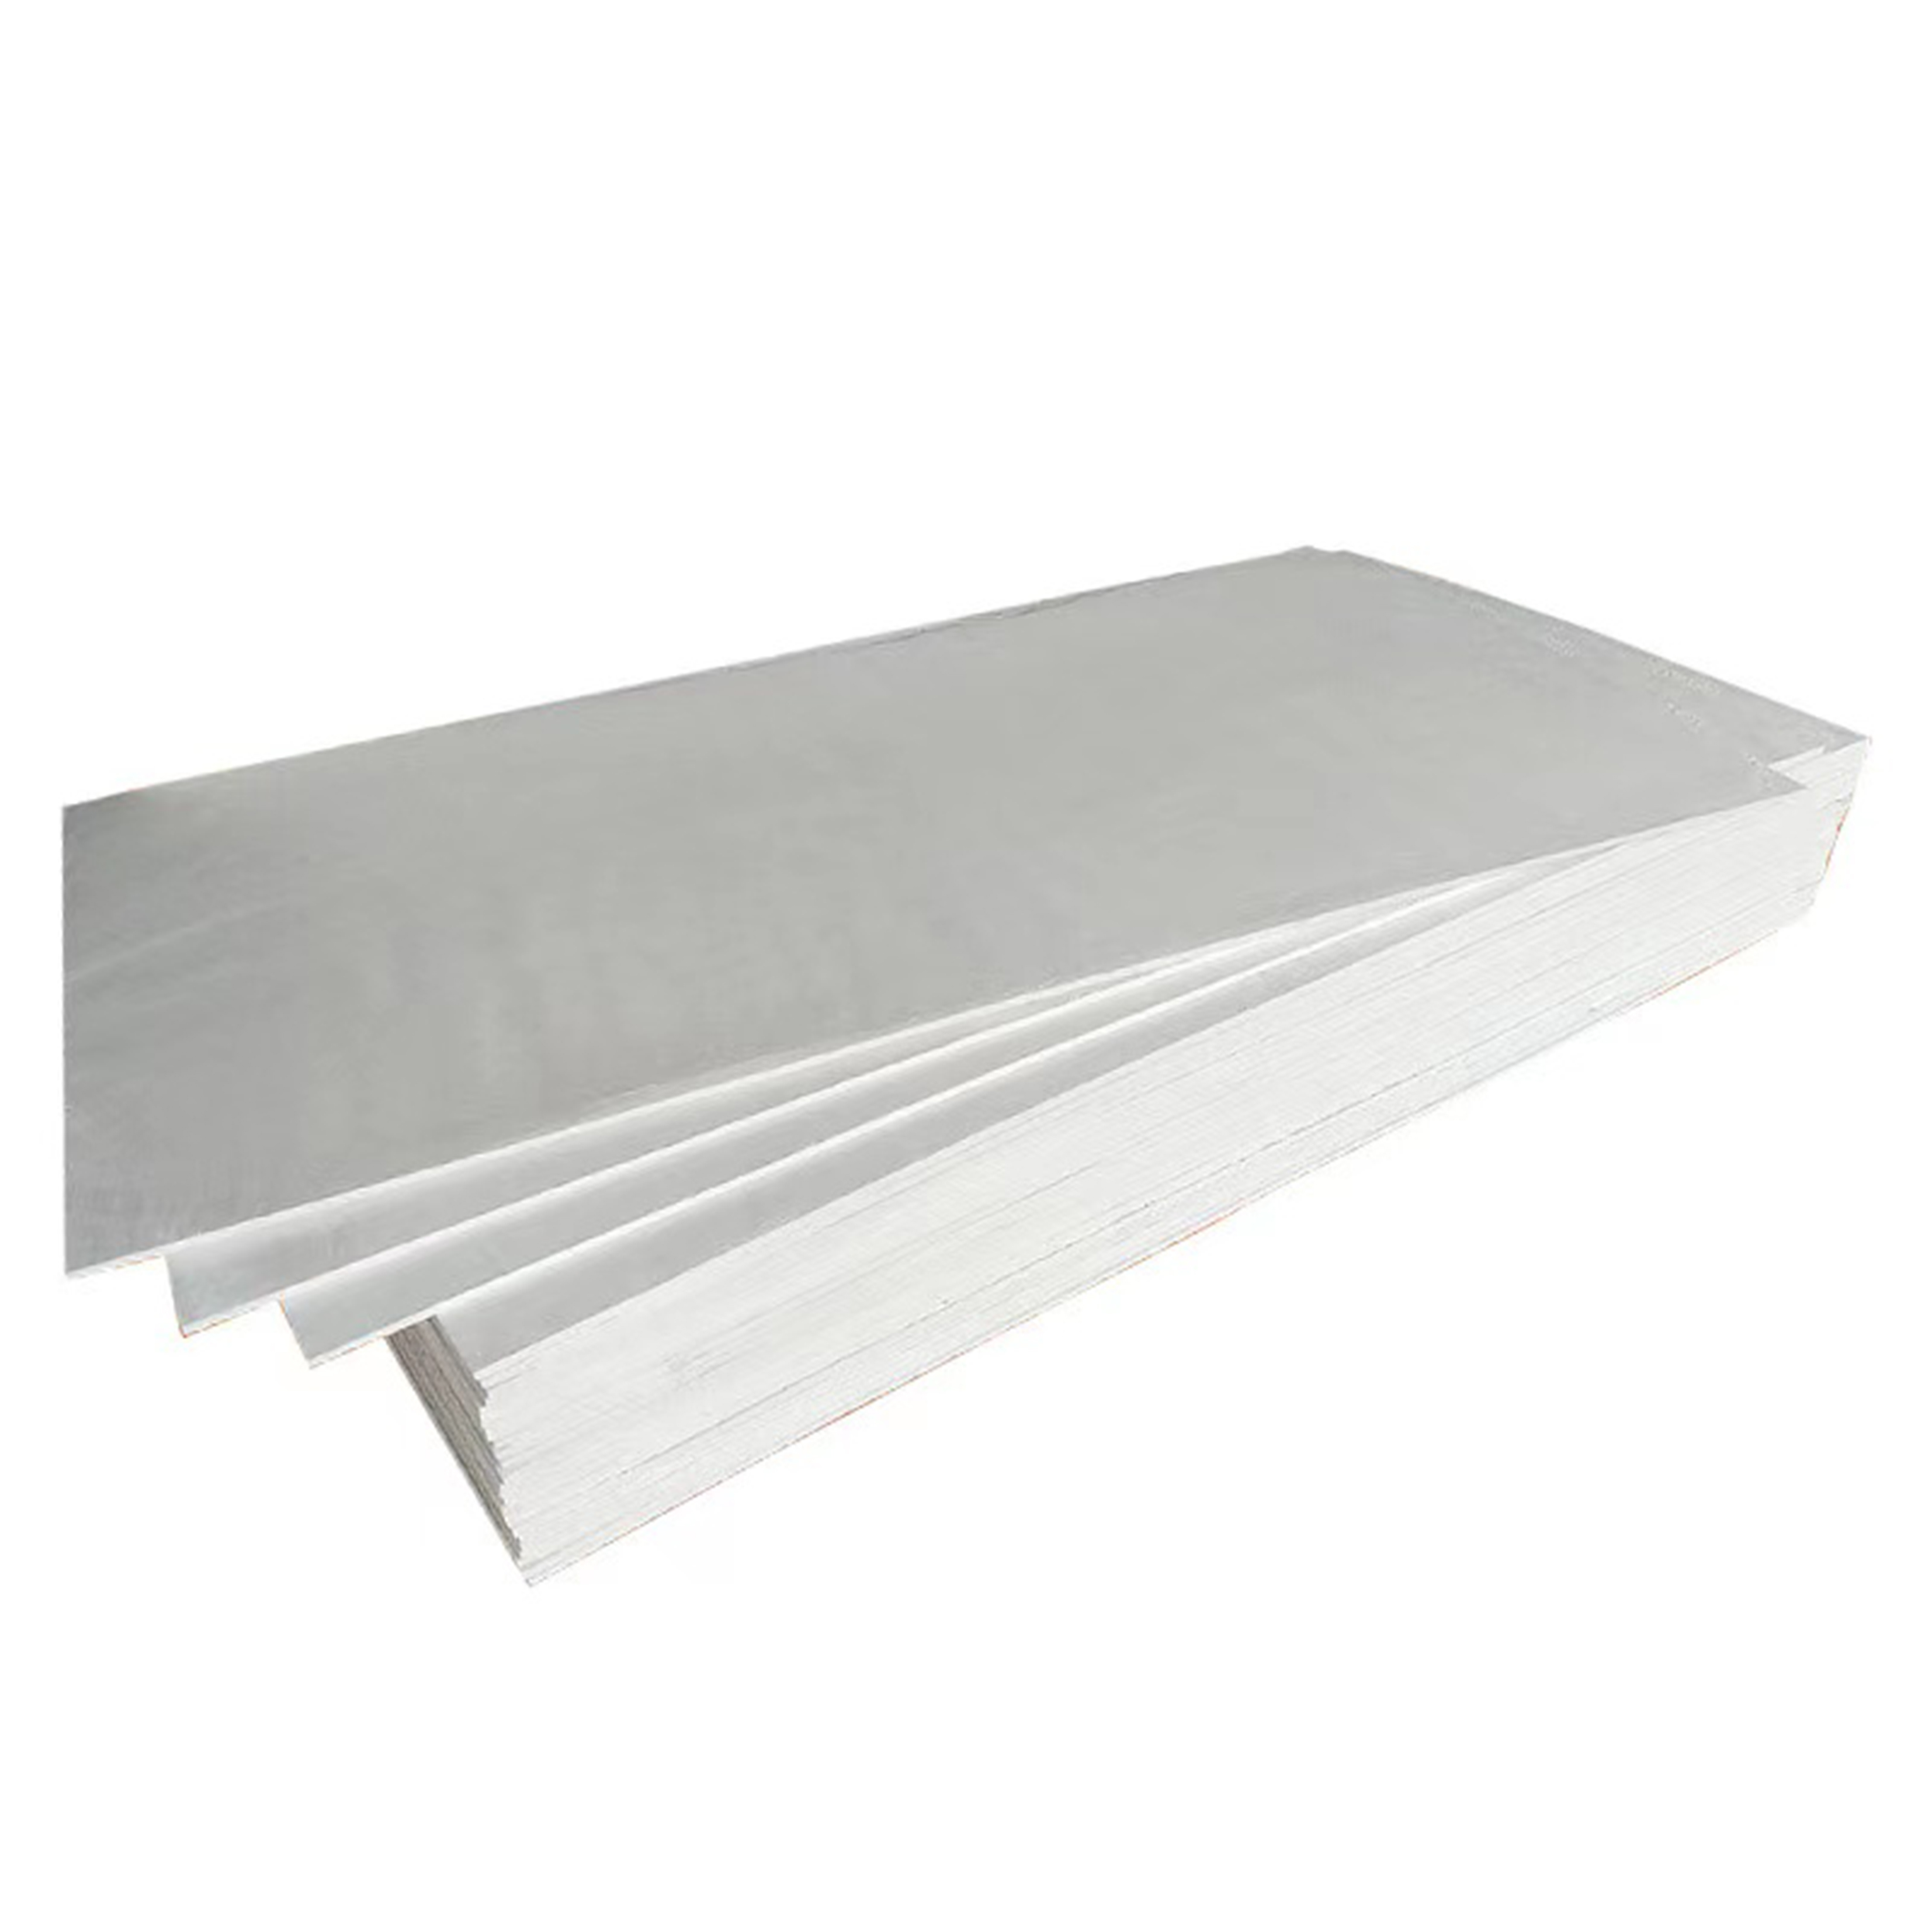 Chinese suppliers provide high-quality fireproof material boards